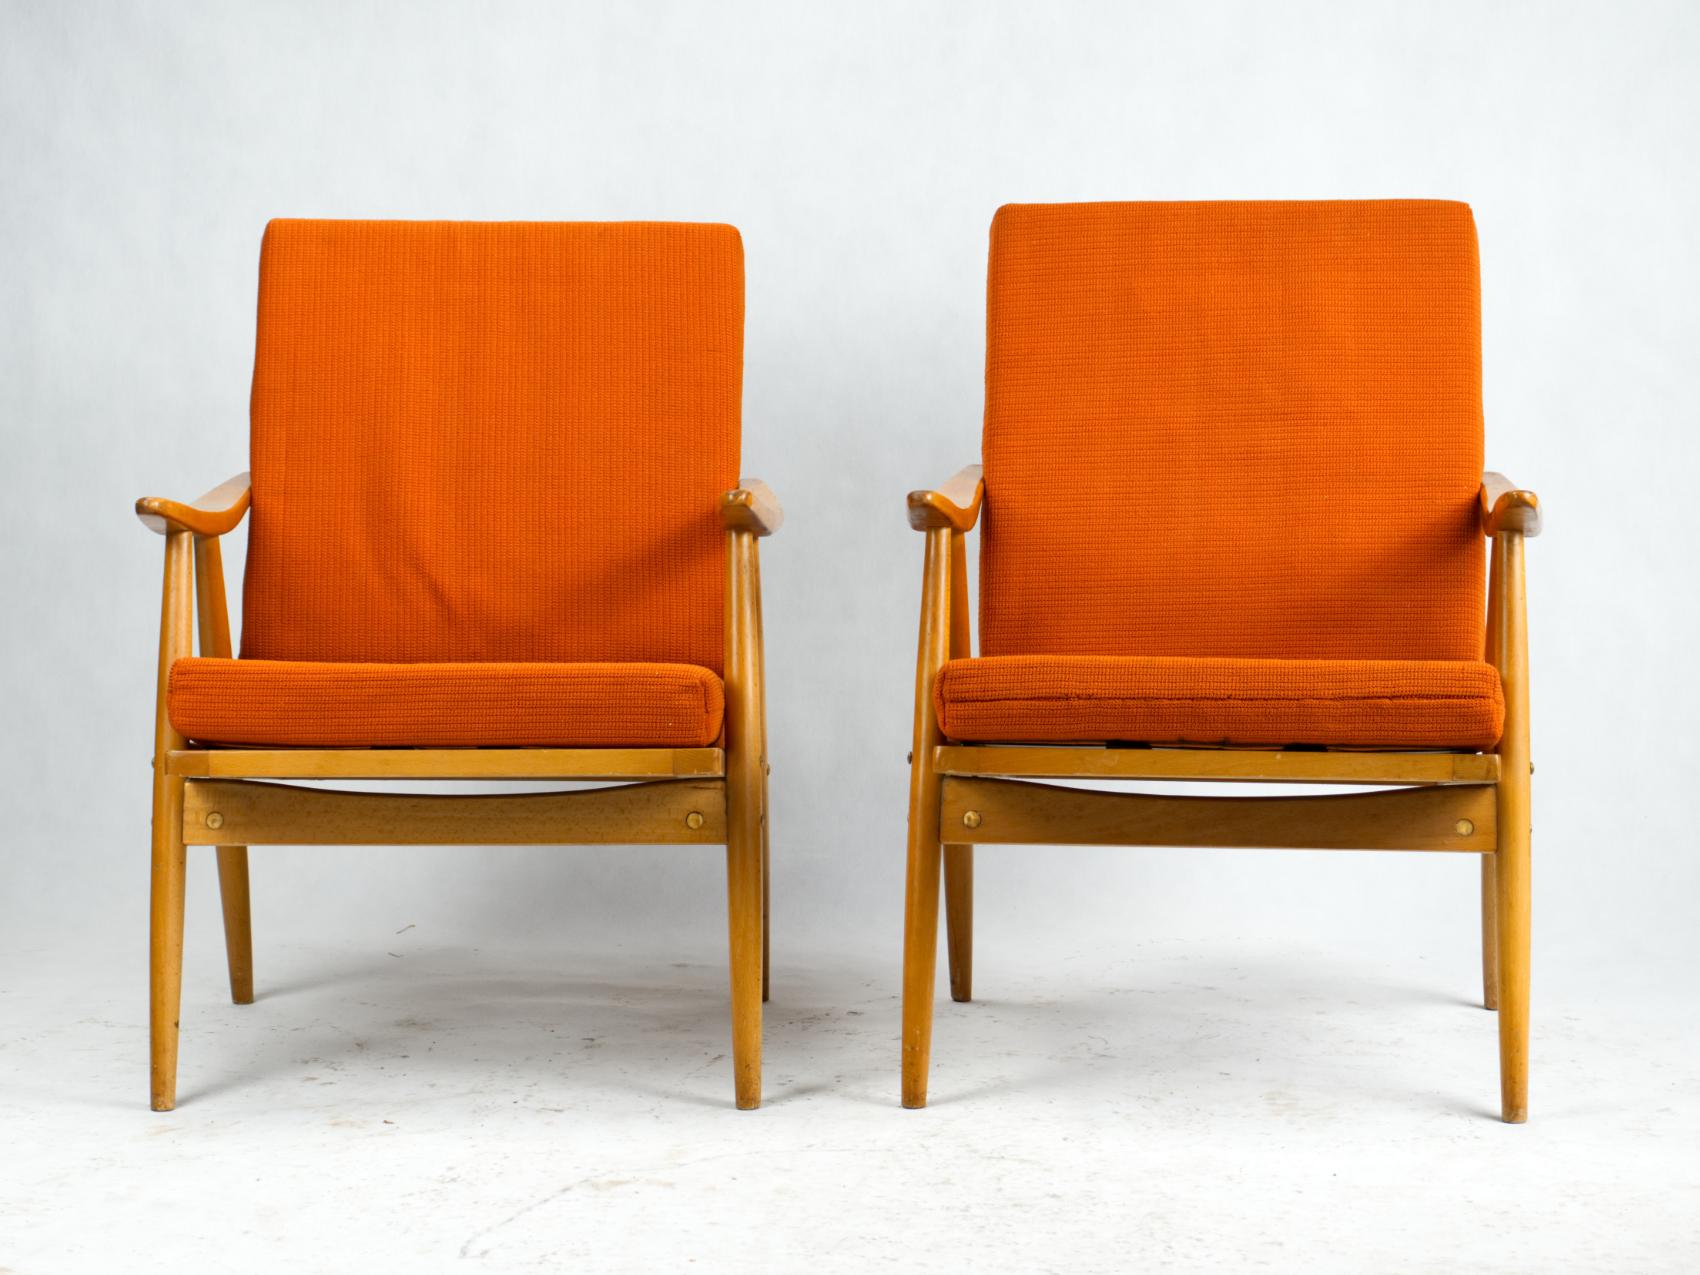 These chairs were produced by the renowned Czechoslovakian manufacturer TON in the 1960s.
Chairs were clearly inspired by Scandinavian aesthetics. The slick, organic shaped armrest with precise details are the main design feature.